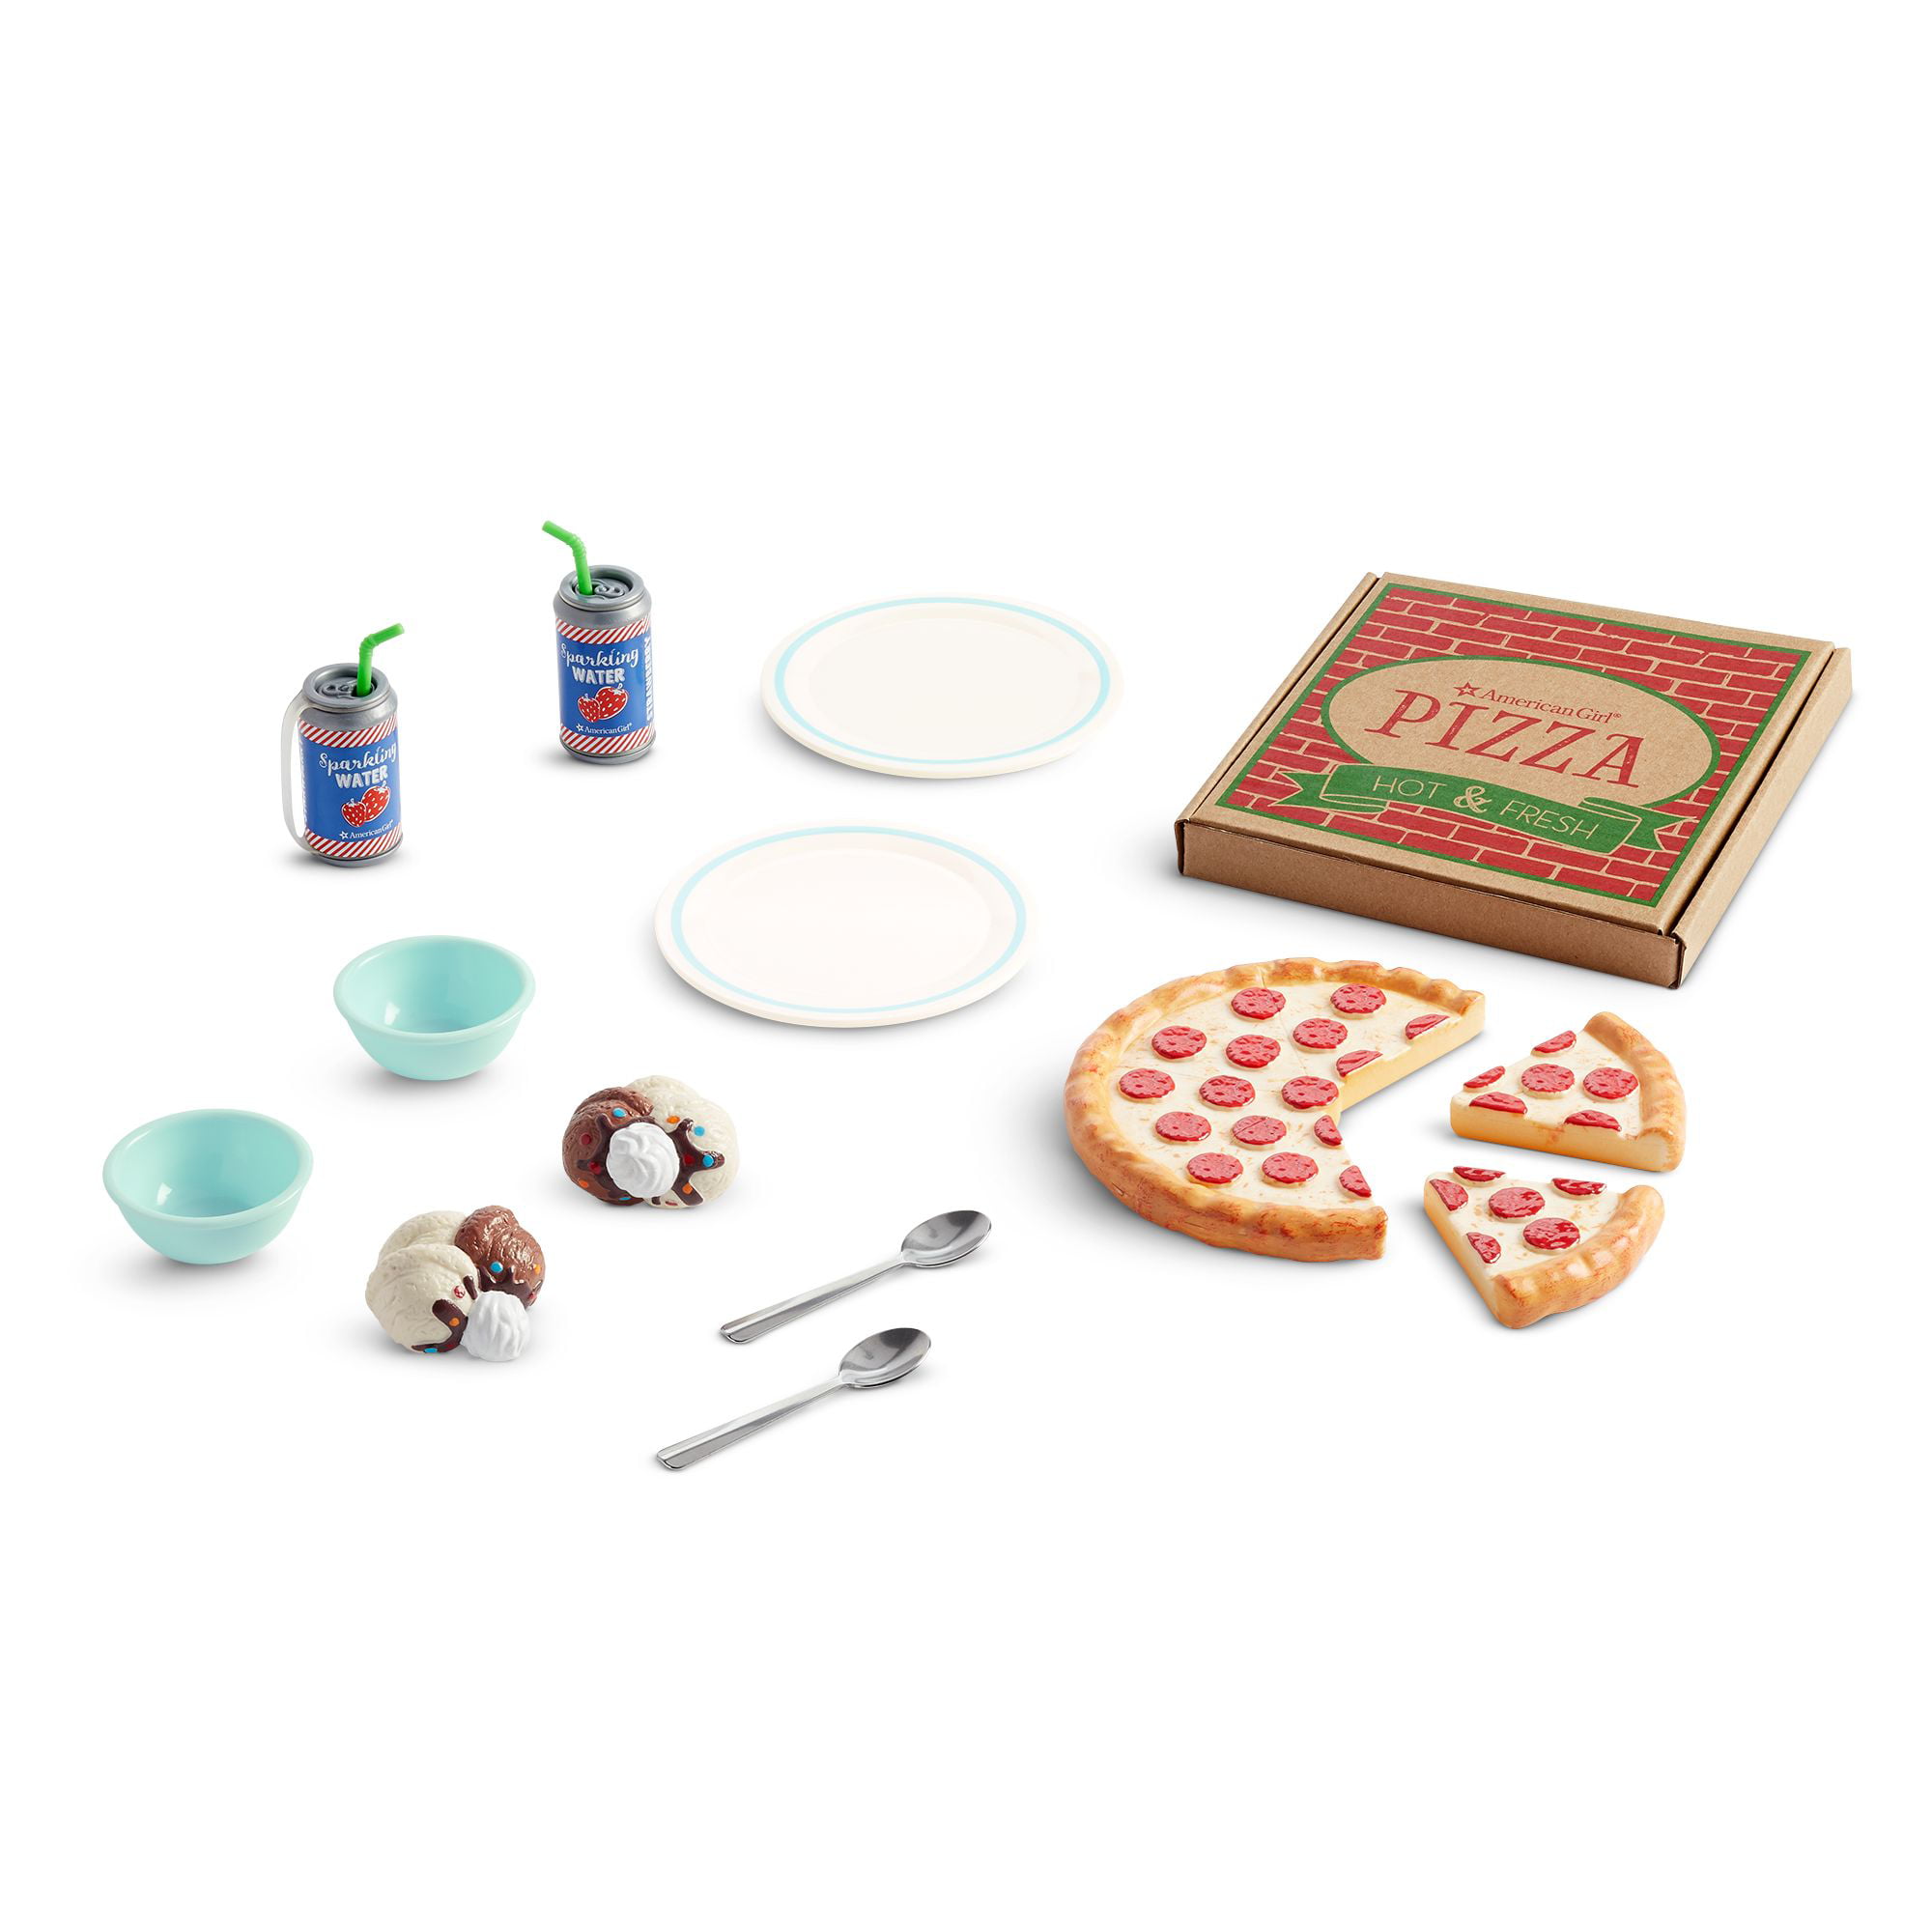 American Girl pizza hut pizza box and pan for 18" dolls NEW